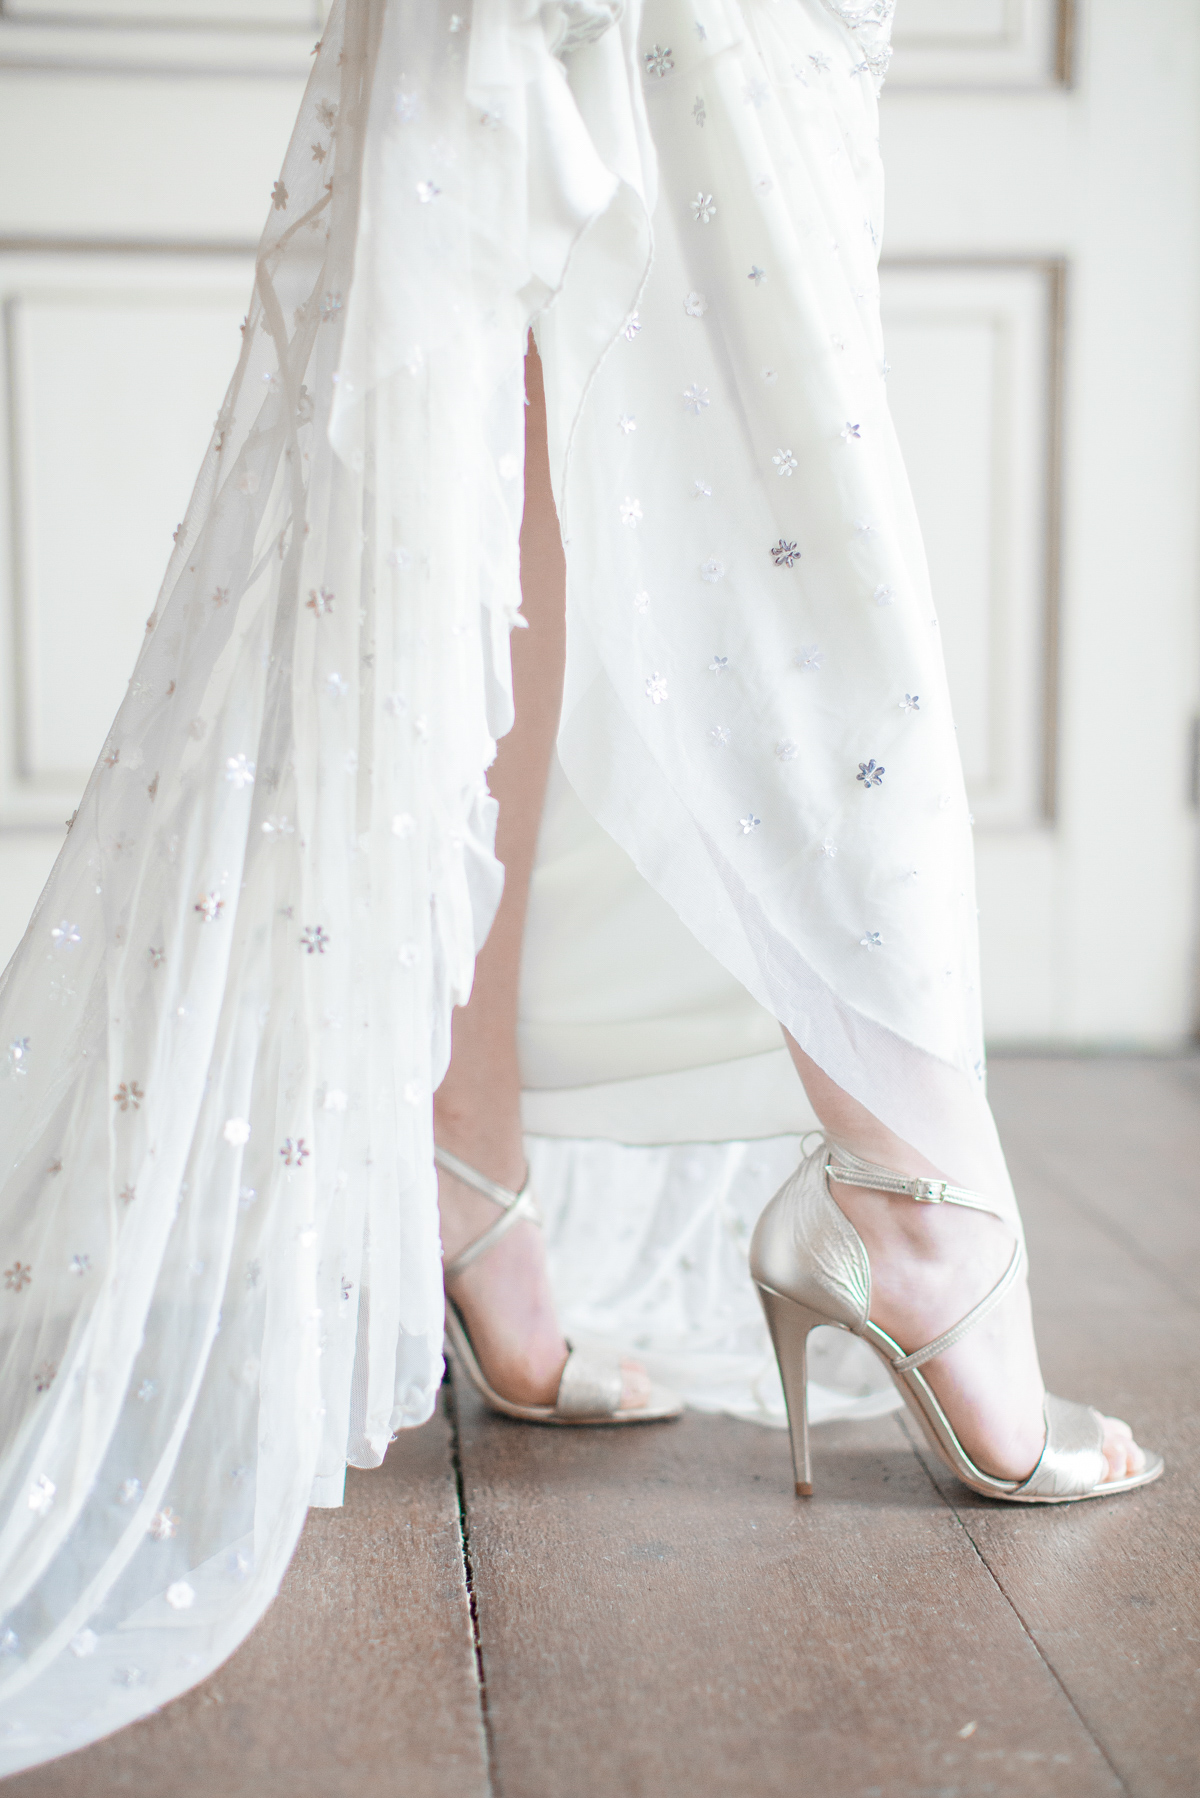 Opulent glamour inspiration for brides. Photography by Kerry Bartlett.